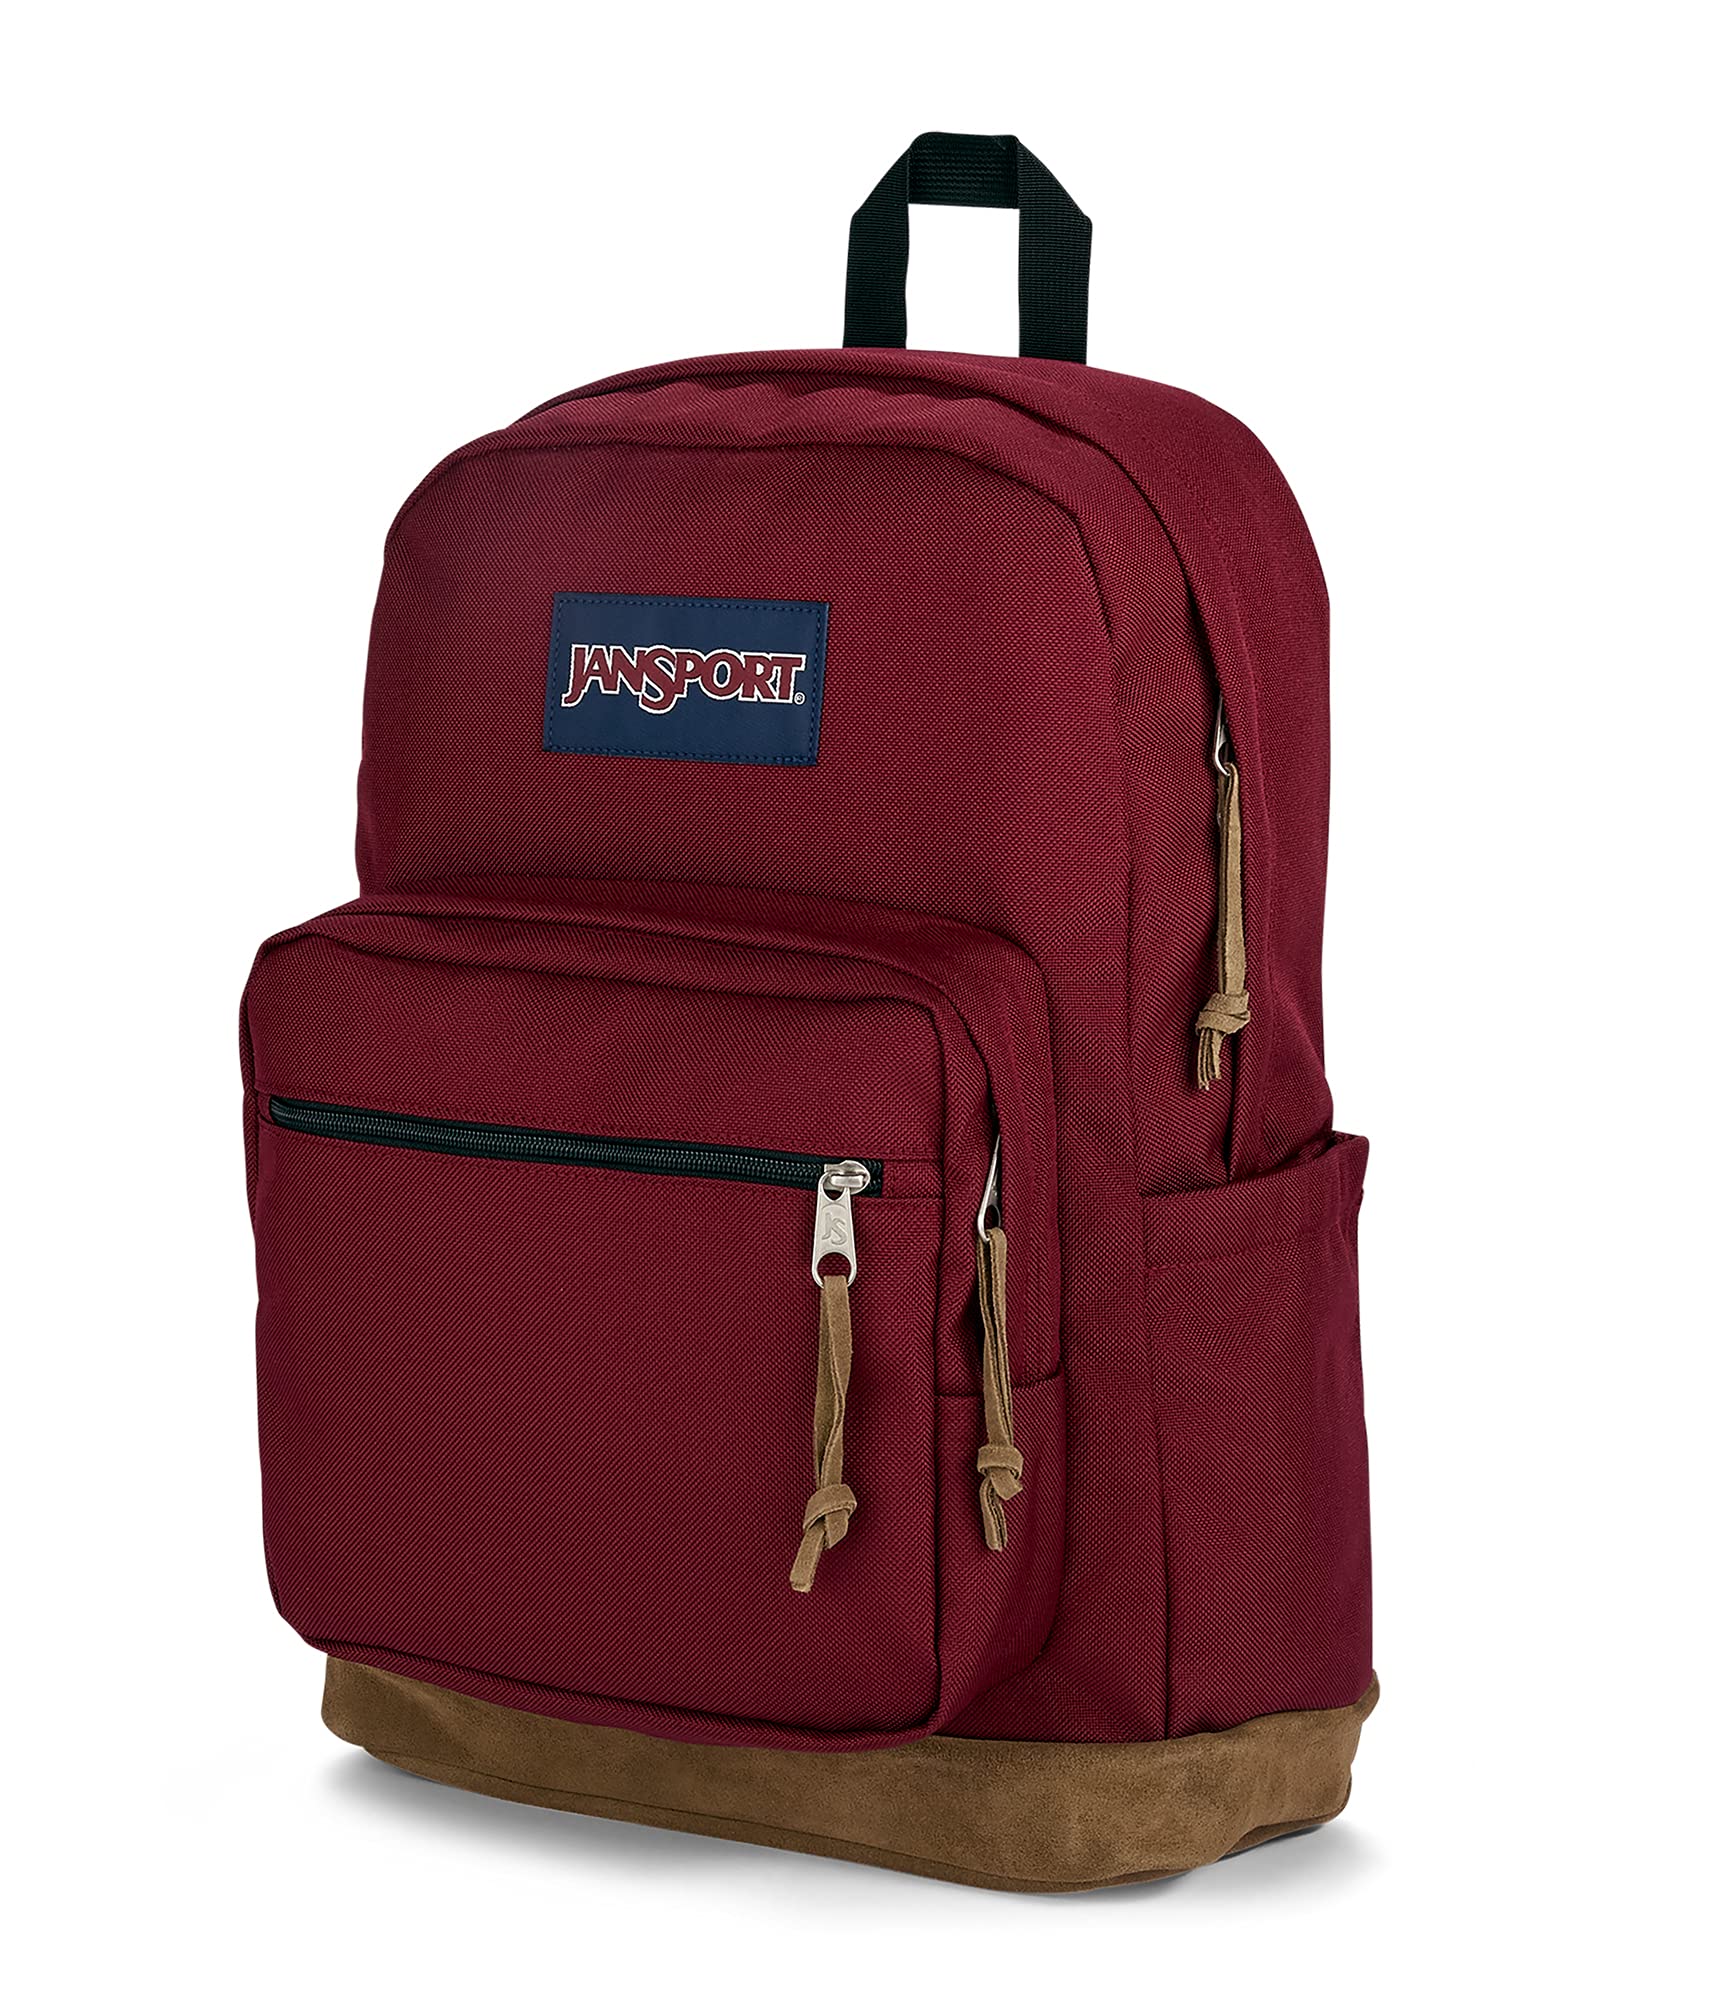 JanSport Right Pack Backpack - Travel, Work, or Laptop Bookbag with Leather Bottom, Russet Red